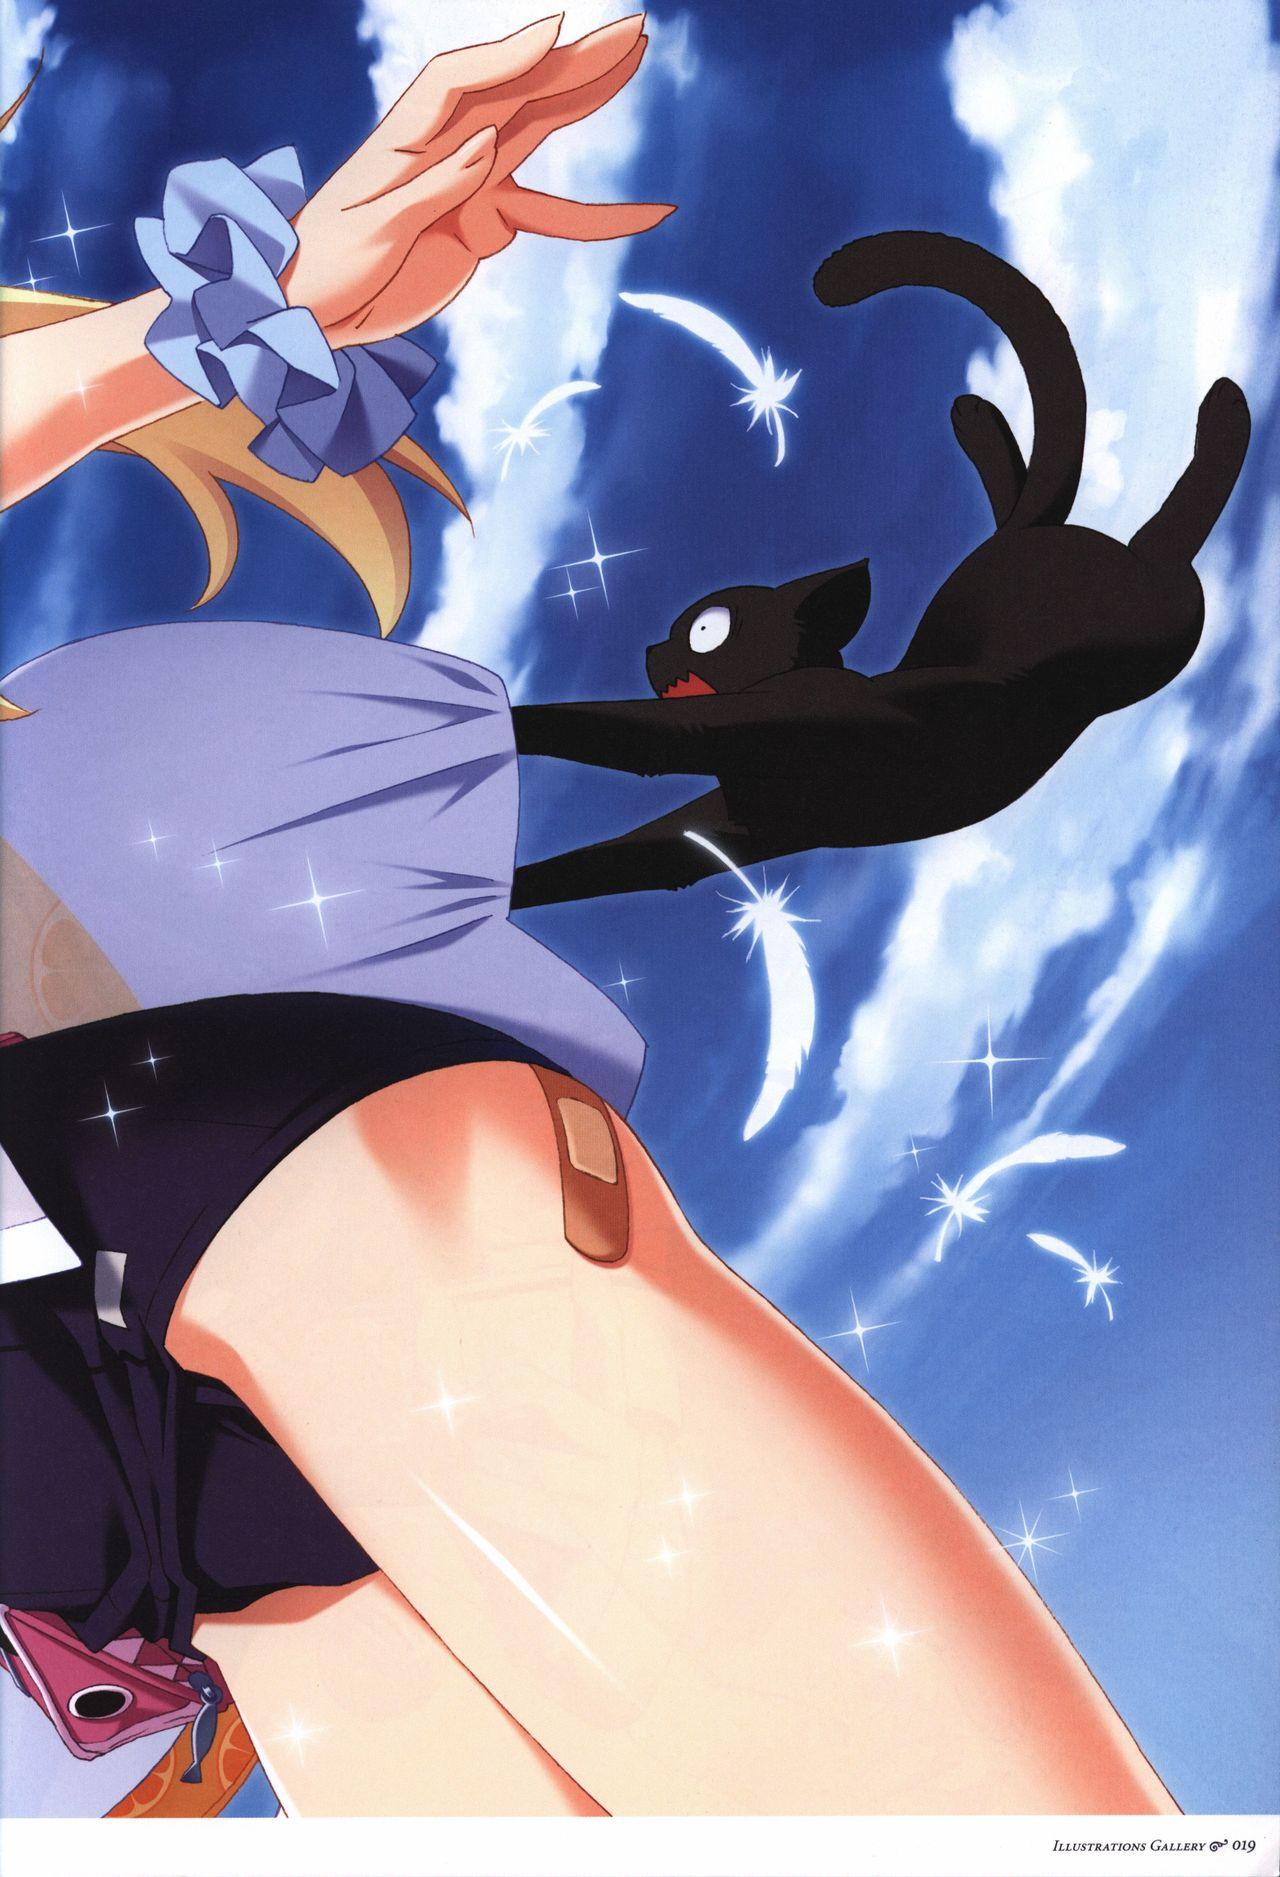 The Fruit of Grisaia Visual FanBook 19